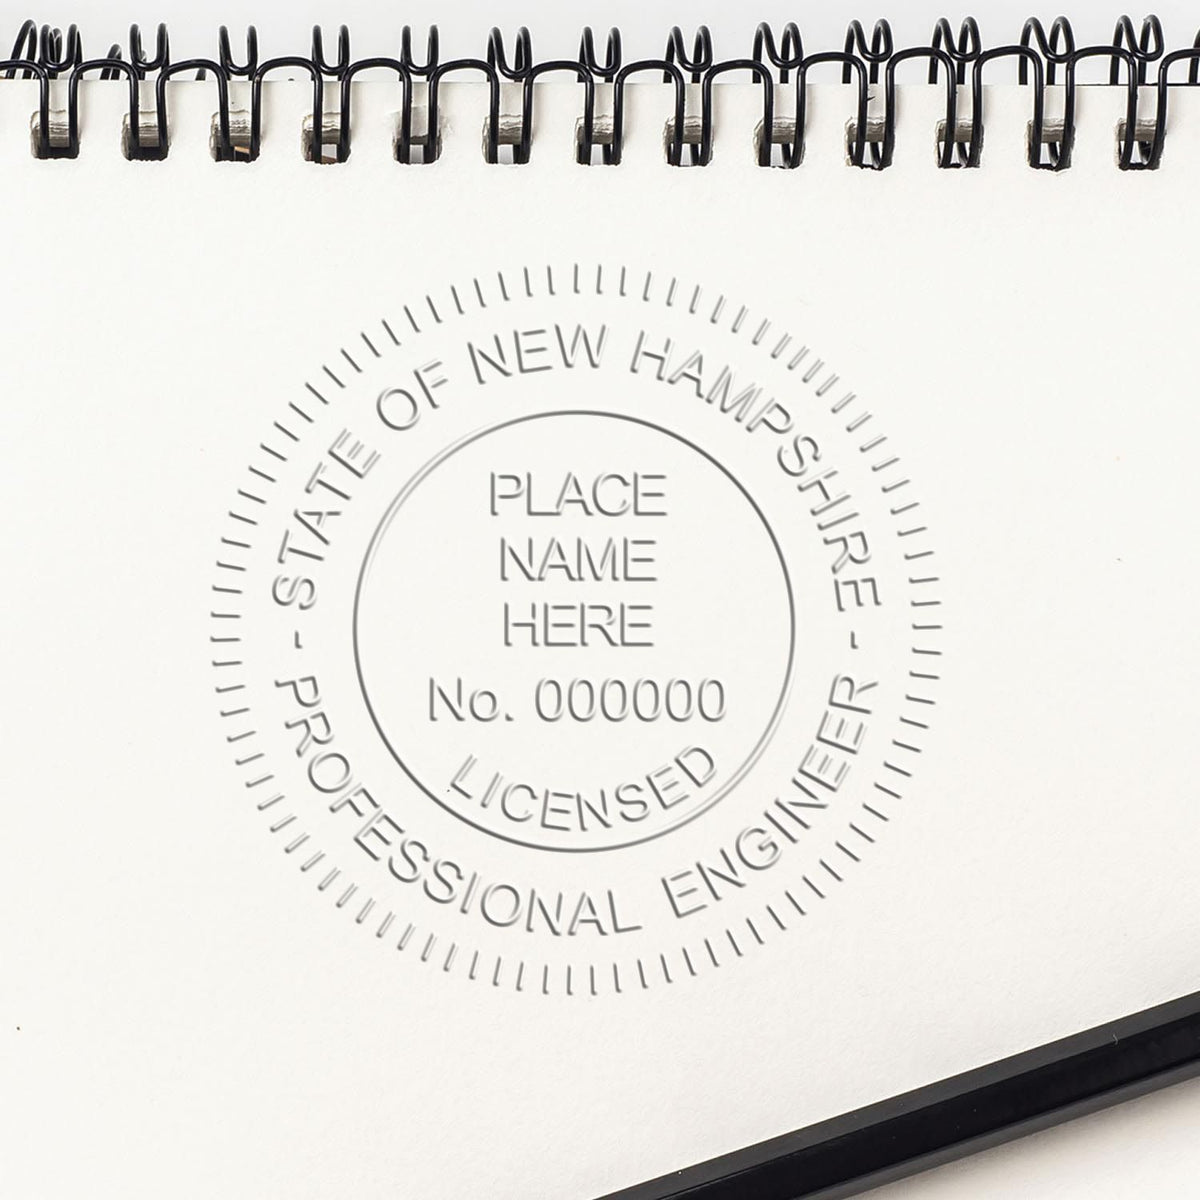 A photograph of the Soft New Hampshire Professional Engineer Seal stamp impression reveals a vivid, professional image of the on paper.